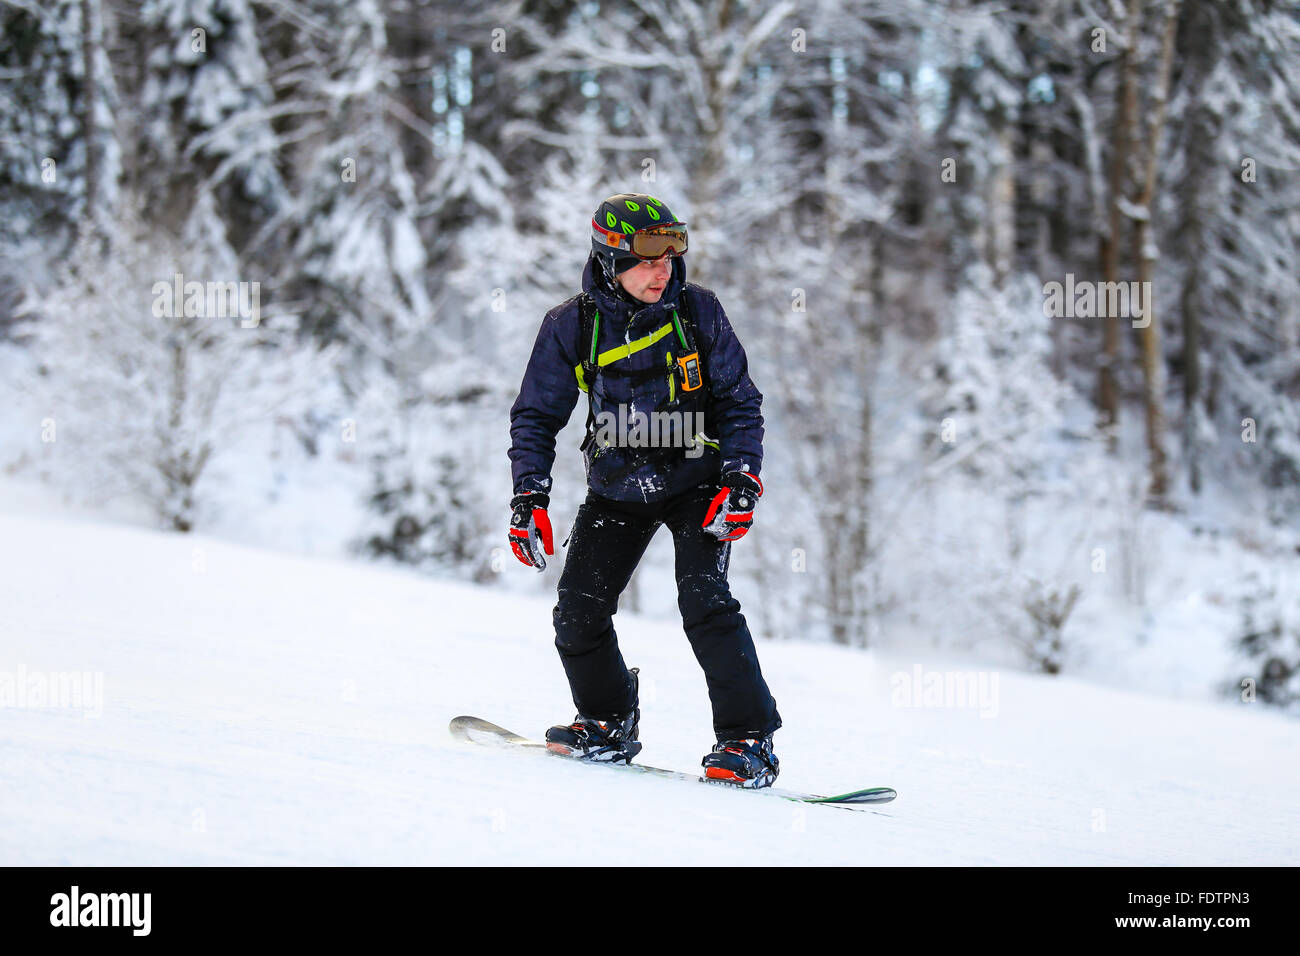 Snowboarder in black suit slides down Stock Photo